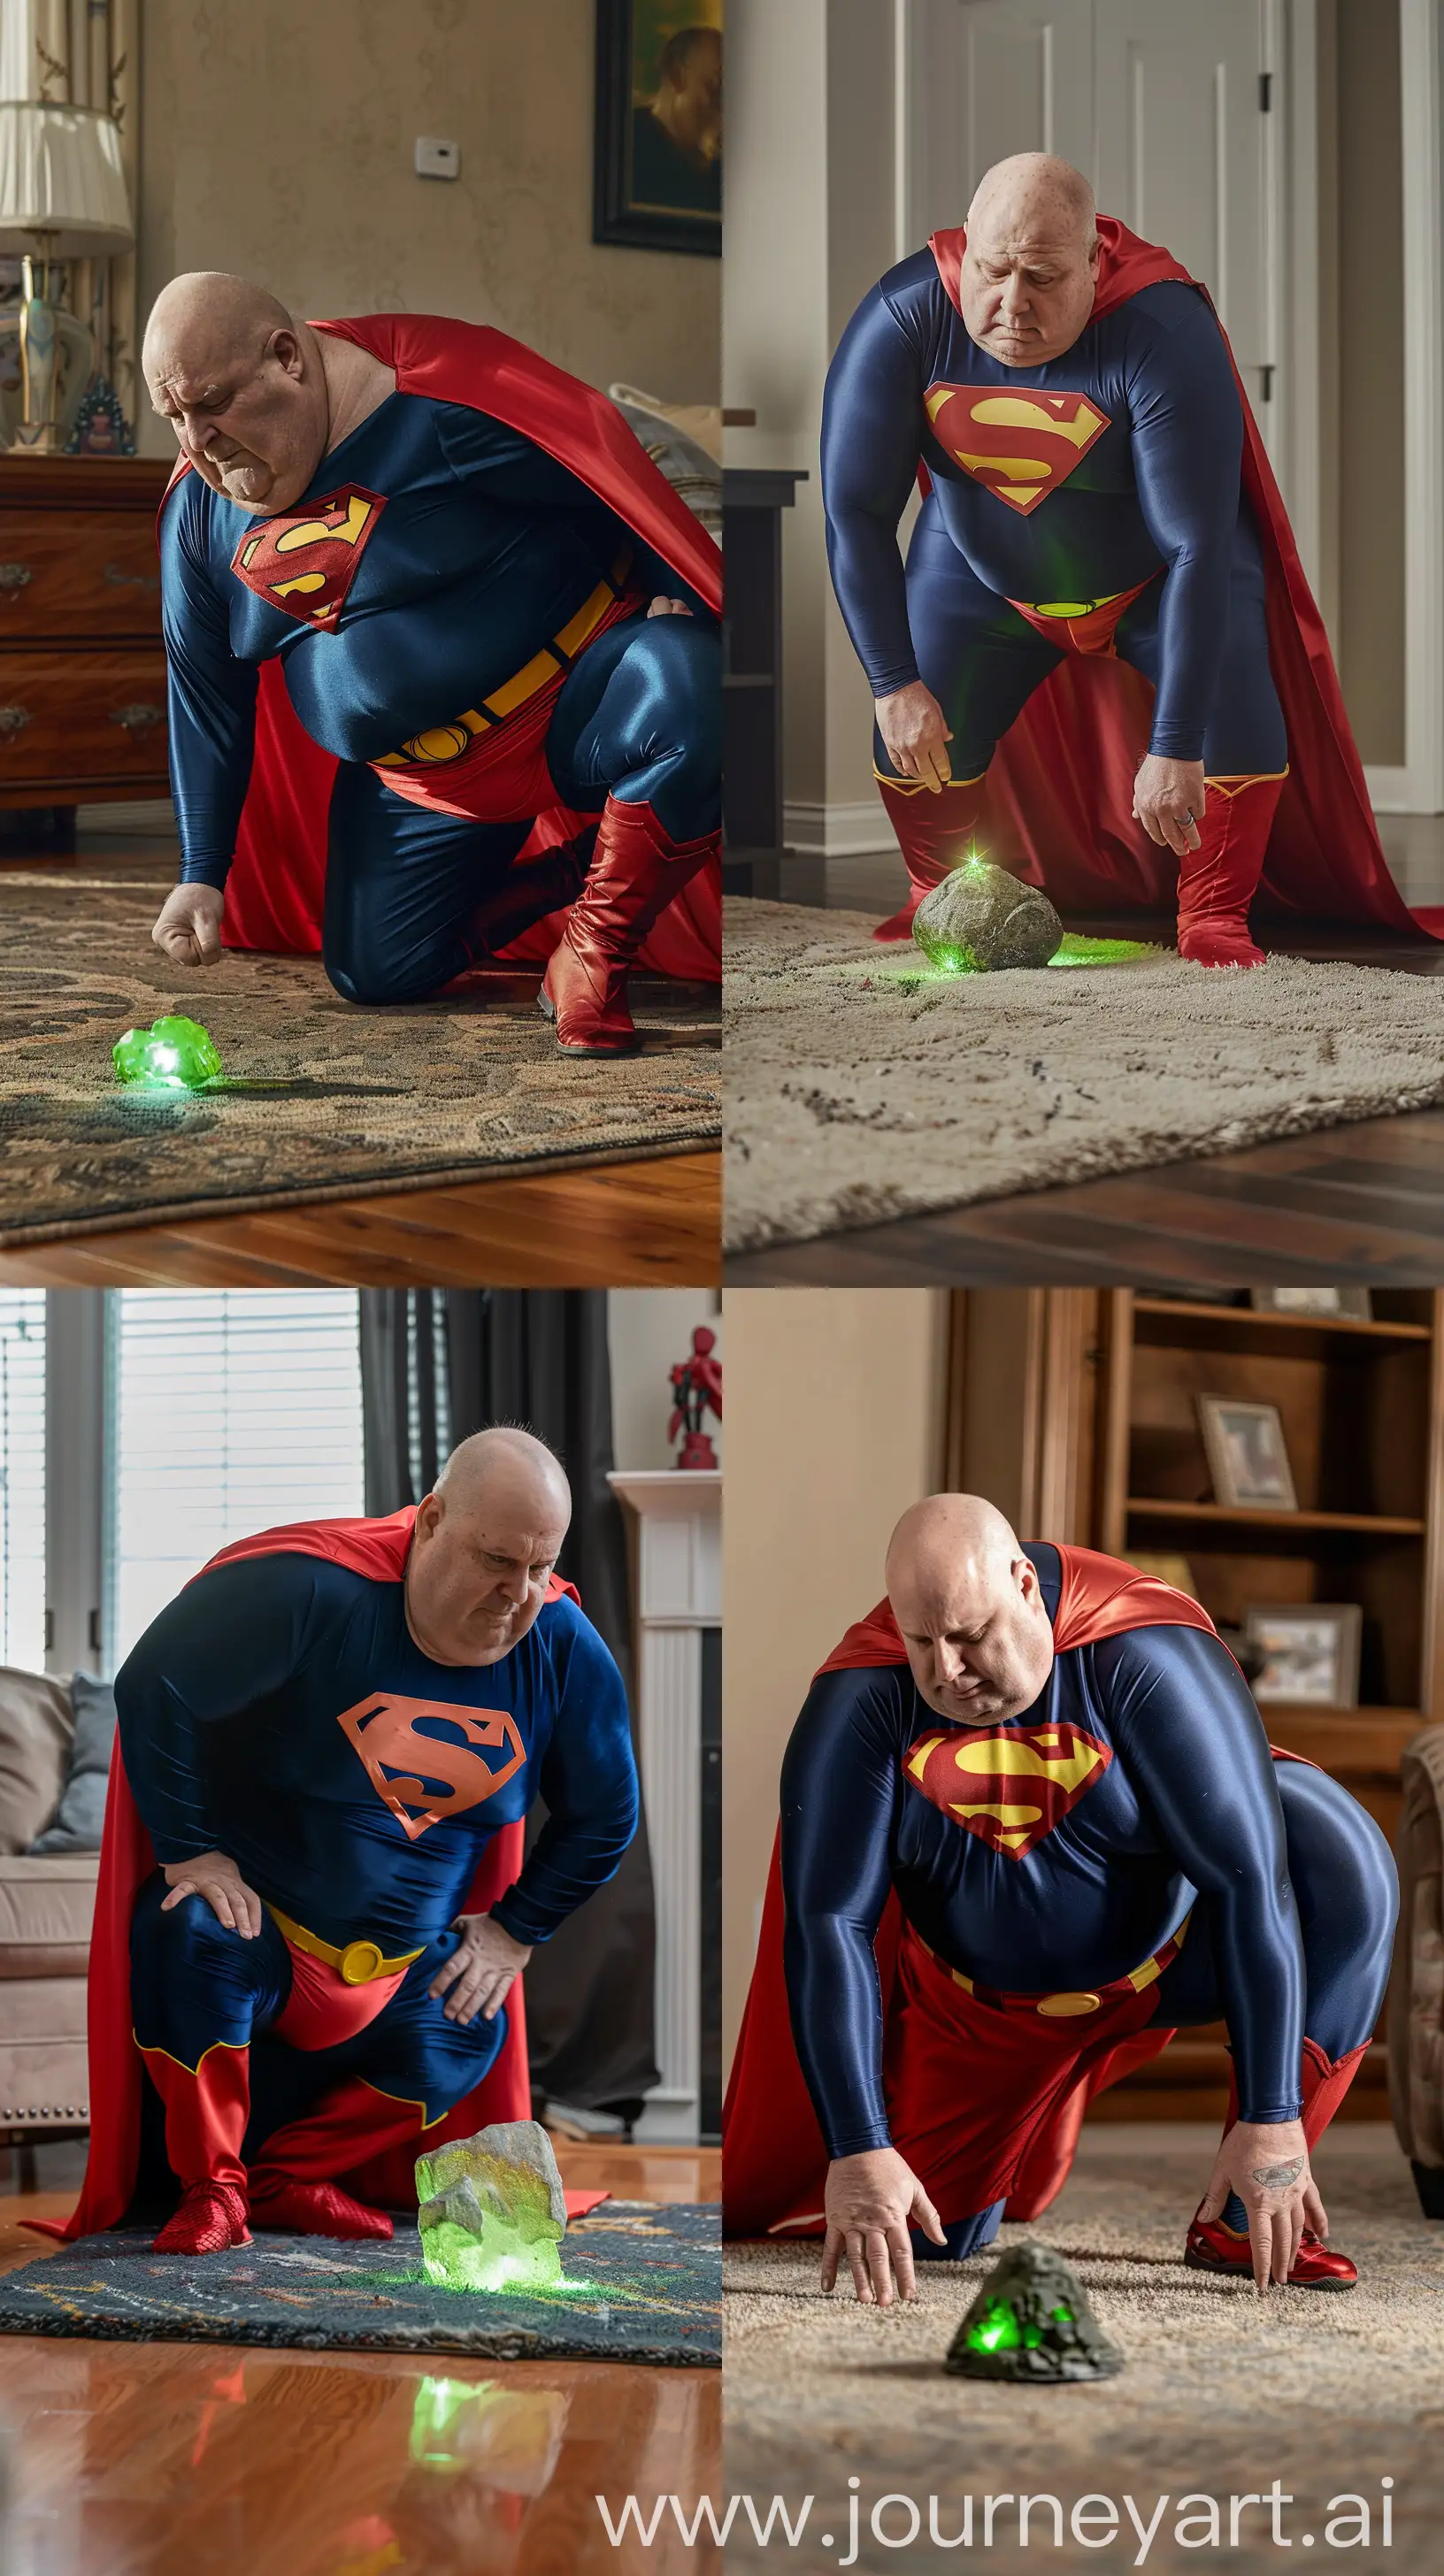 Front close-up photo of a fat man aged 60 wearing silk navy blue complete superman tight uniform with a large red cape, red trunks, yellow belt, red boots. Falling on his knees on the ground in front of a small green glowing rock on the ground. Inside a living room. Bald. Clean Shaven. Natural light. --ar 9:16